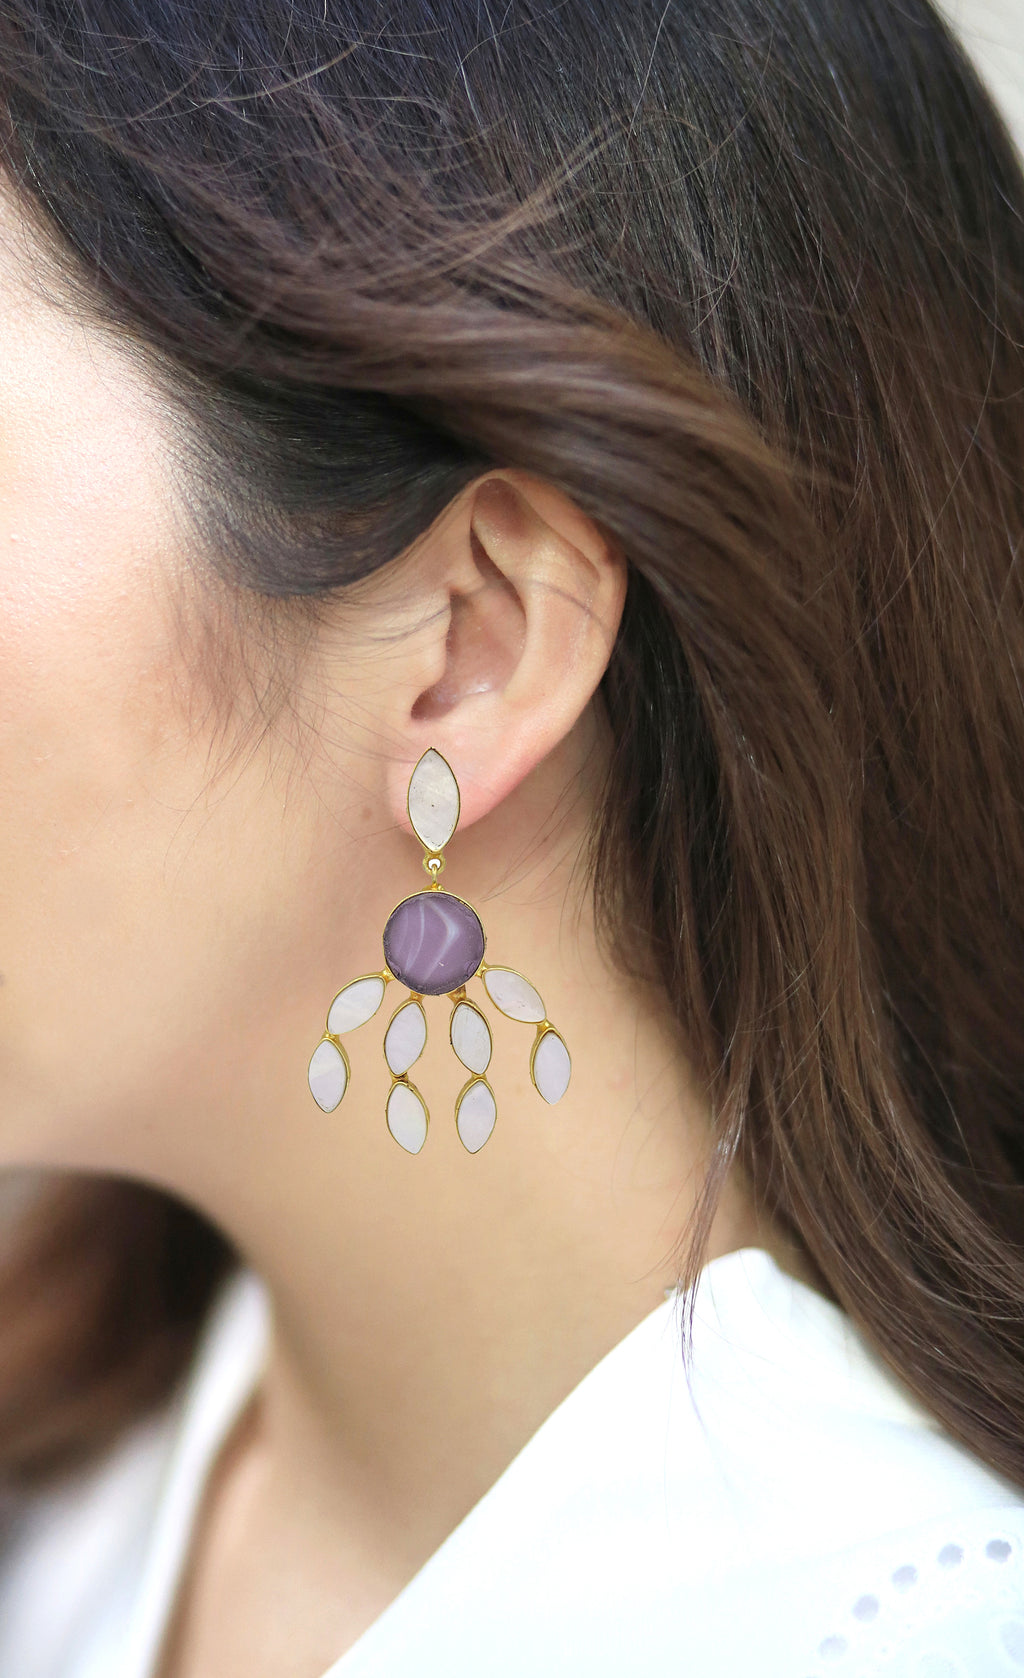 Curtain Earrings (Amethyst) - Statement Earrings - Gold-Plated & Hypoallergenic - Made in India - Dubai Jewellery - Dori